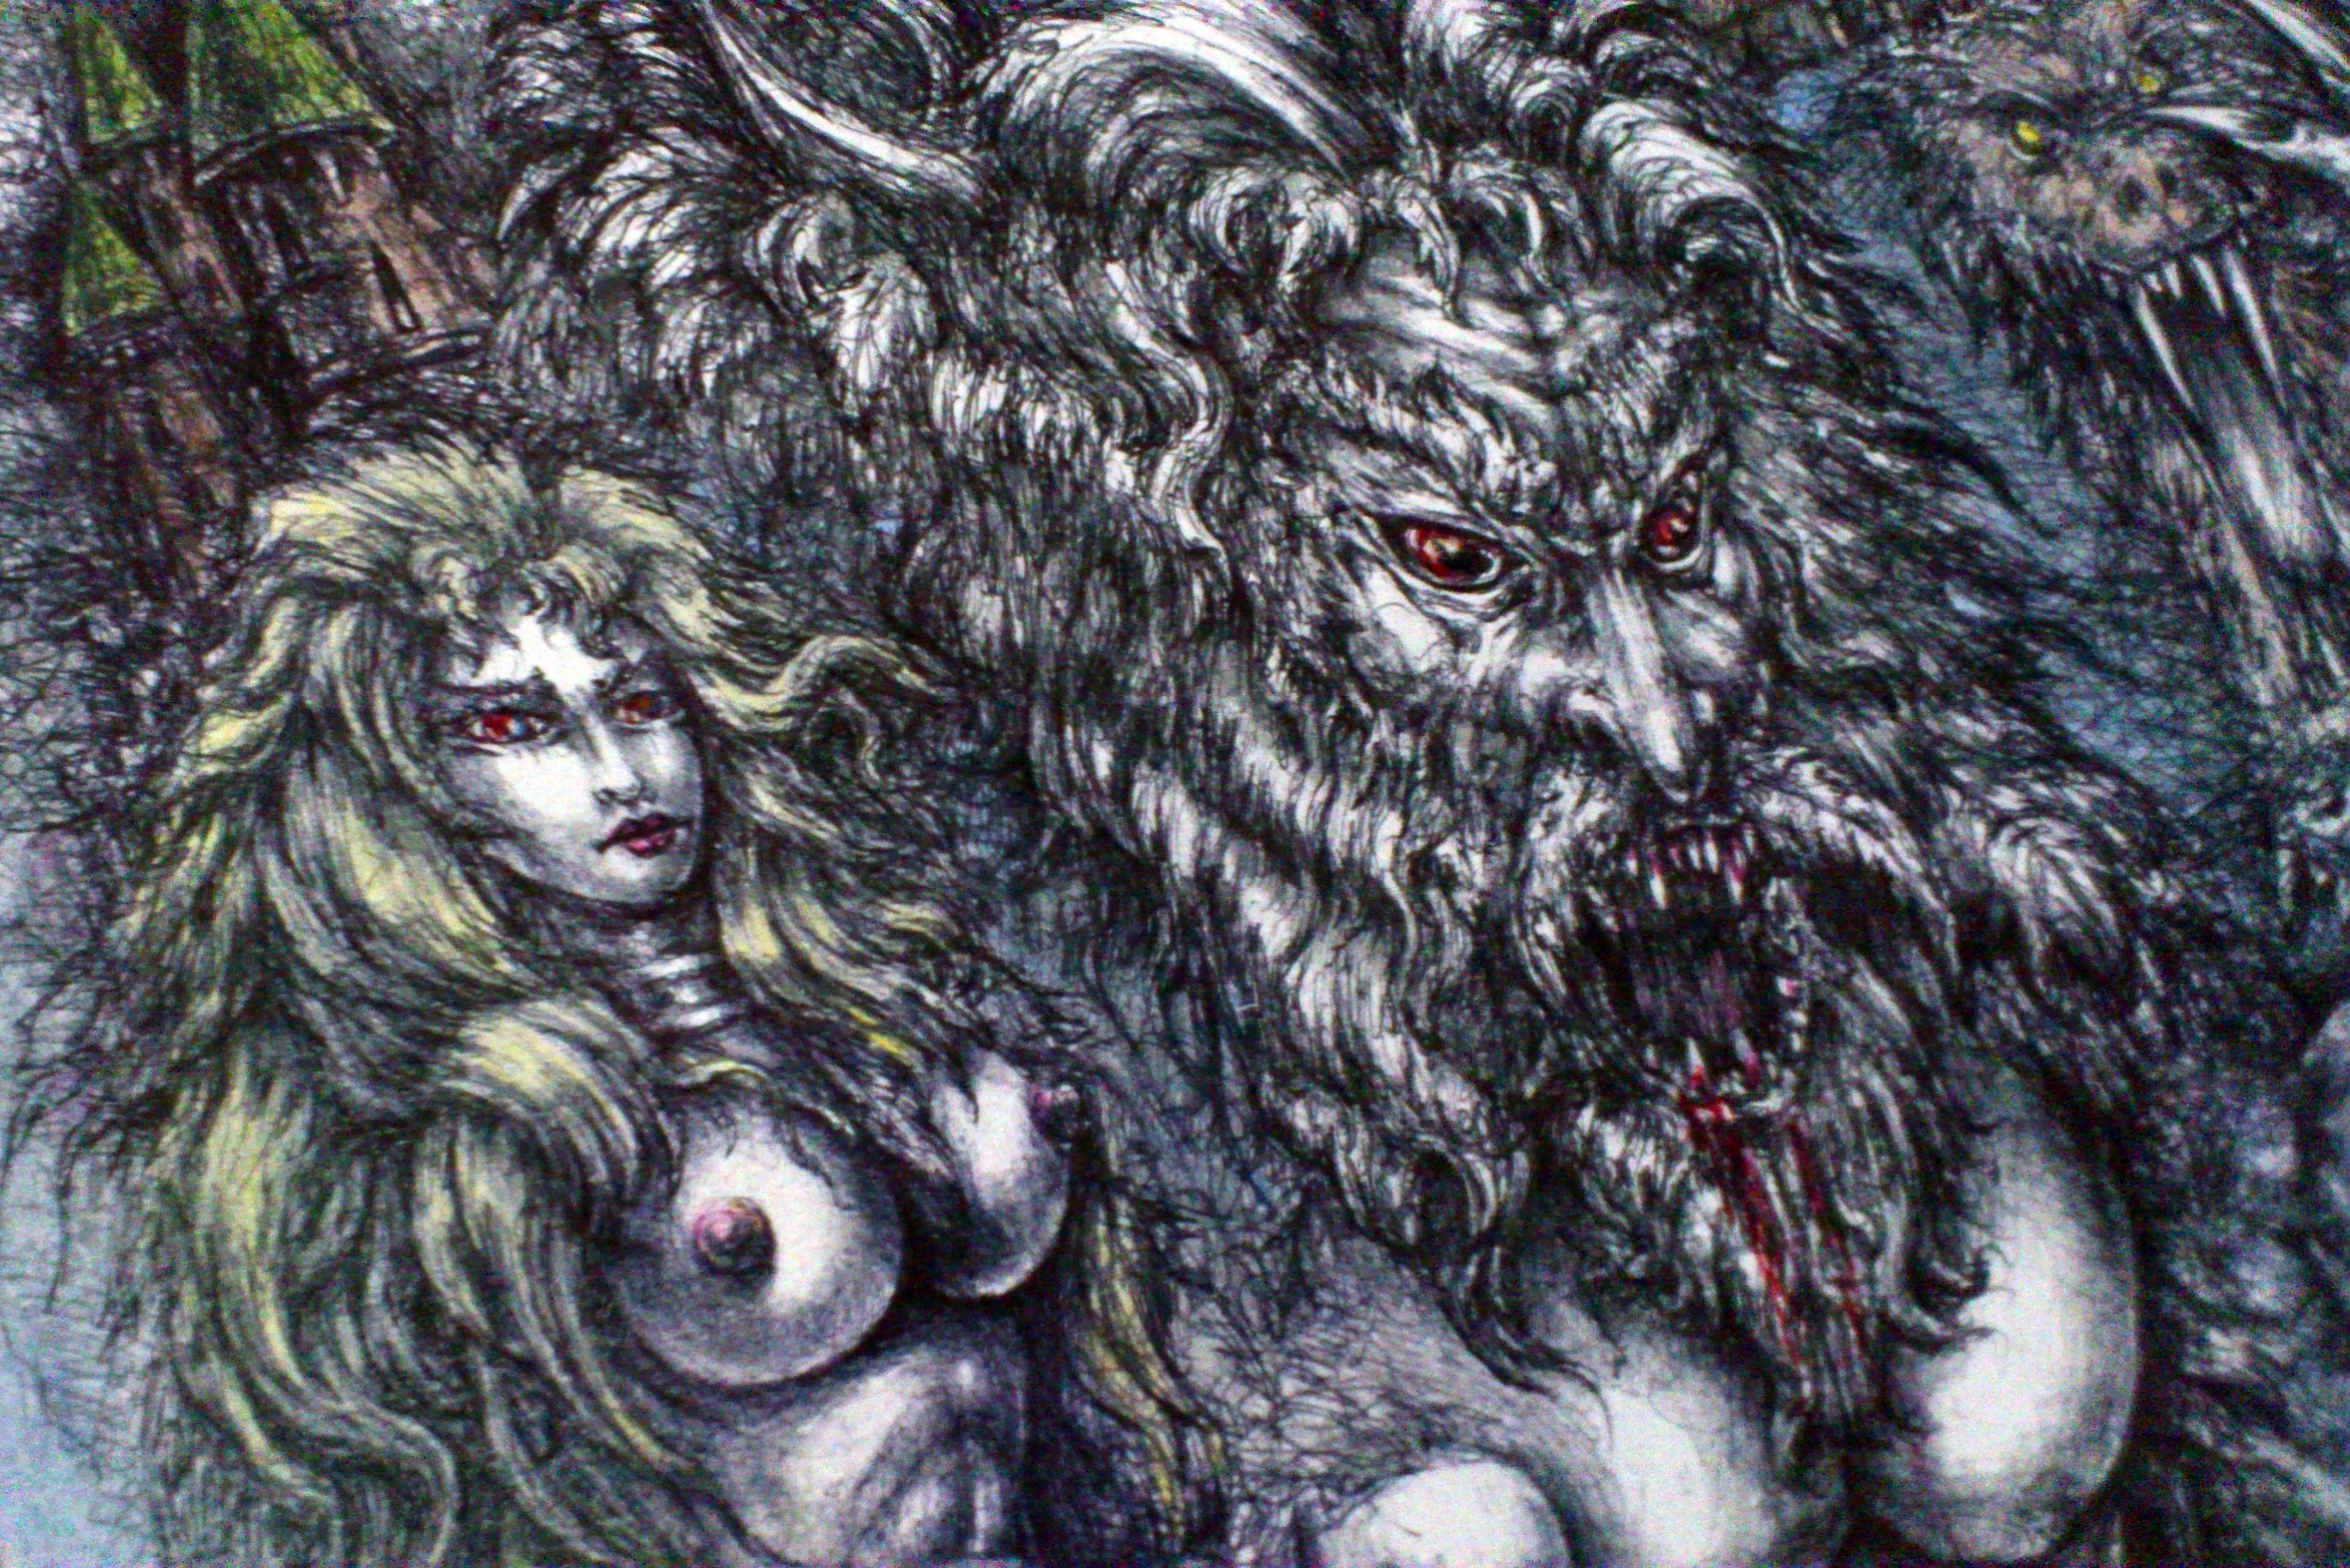 Angel Piangelo Papangelo; RIDING HOOD AND THE WOLF, 2016, Original Mixed Media, 35 x 50 cm. Artwork description: 241 PAINTING DRAWING - mixed Technique - Permanent, as permanent black pens were used for the main Drawing - FANTASY DARK HORROR - inspired from the medieval Mythology the Fairy Tales of Grimm Brothers - Original Angel P.  Artwork 2016 - a black wooden Frame is included, which means that the Artwork is ready ...